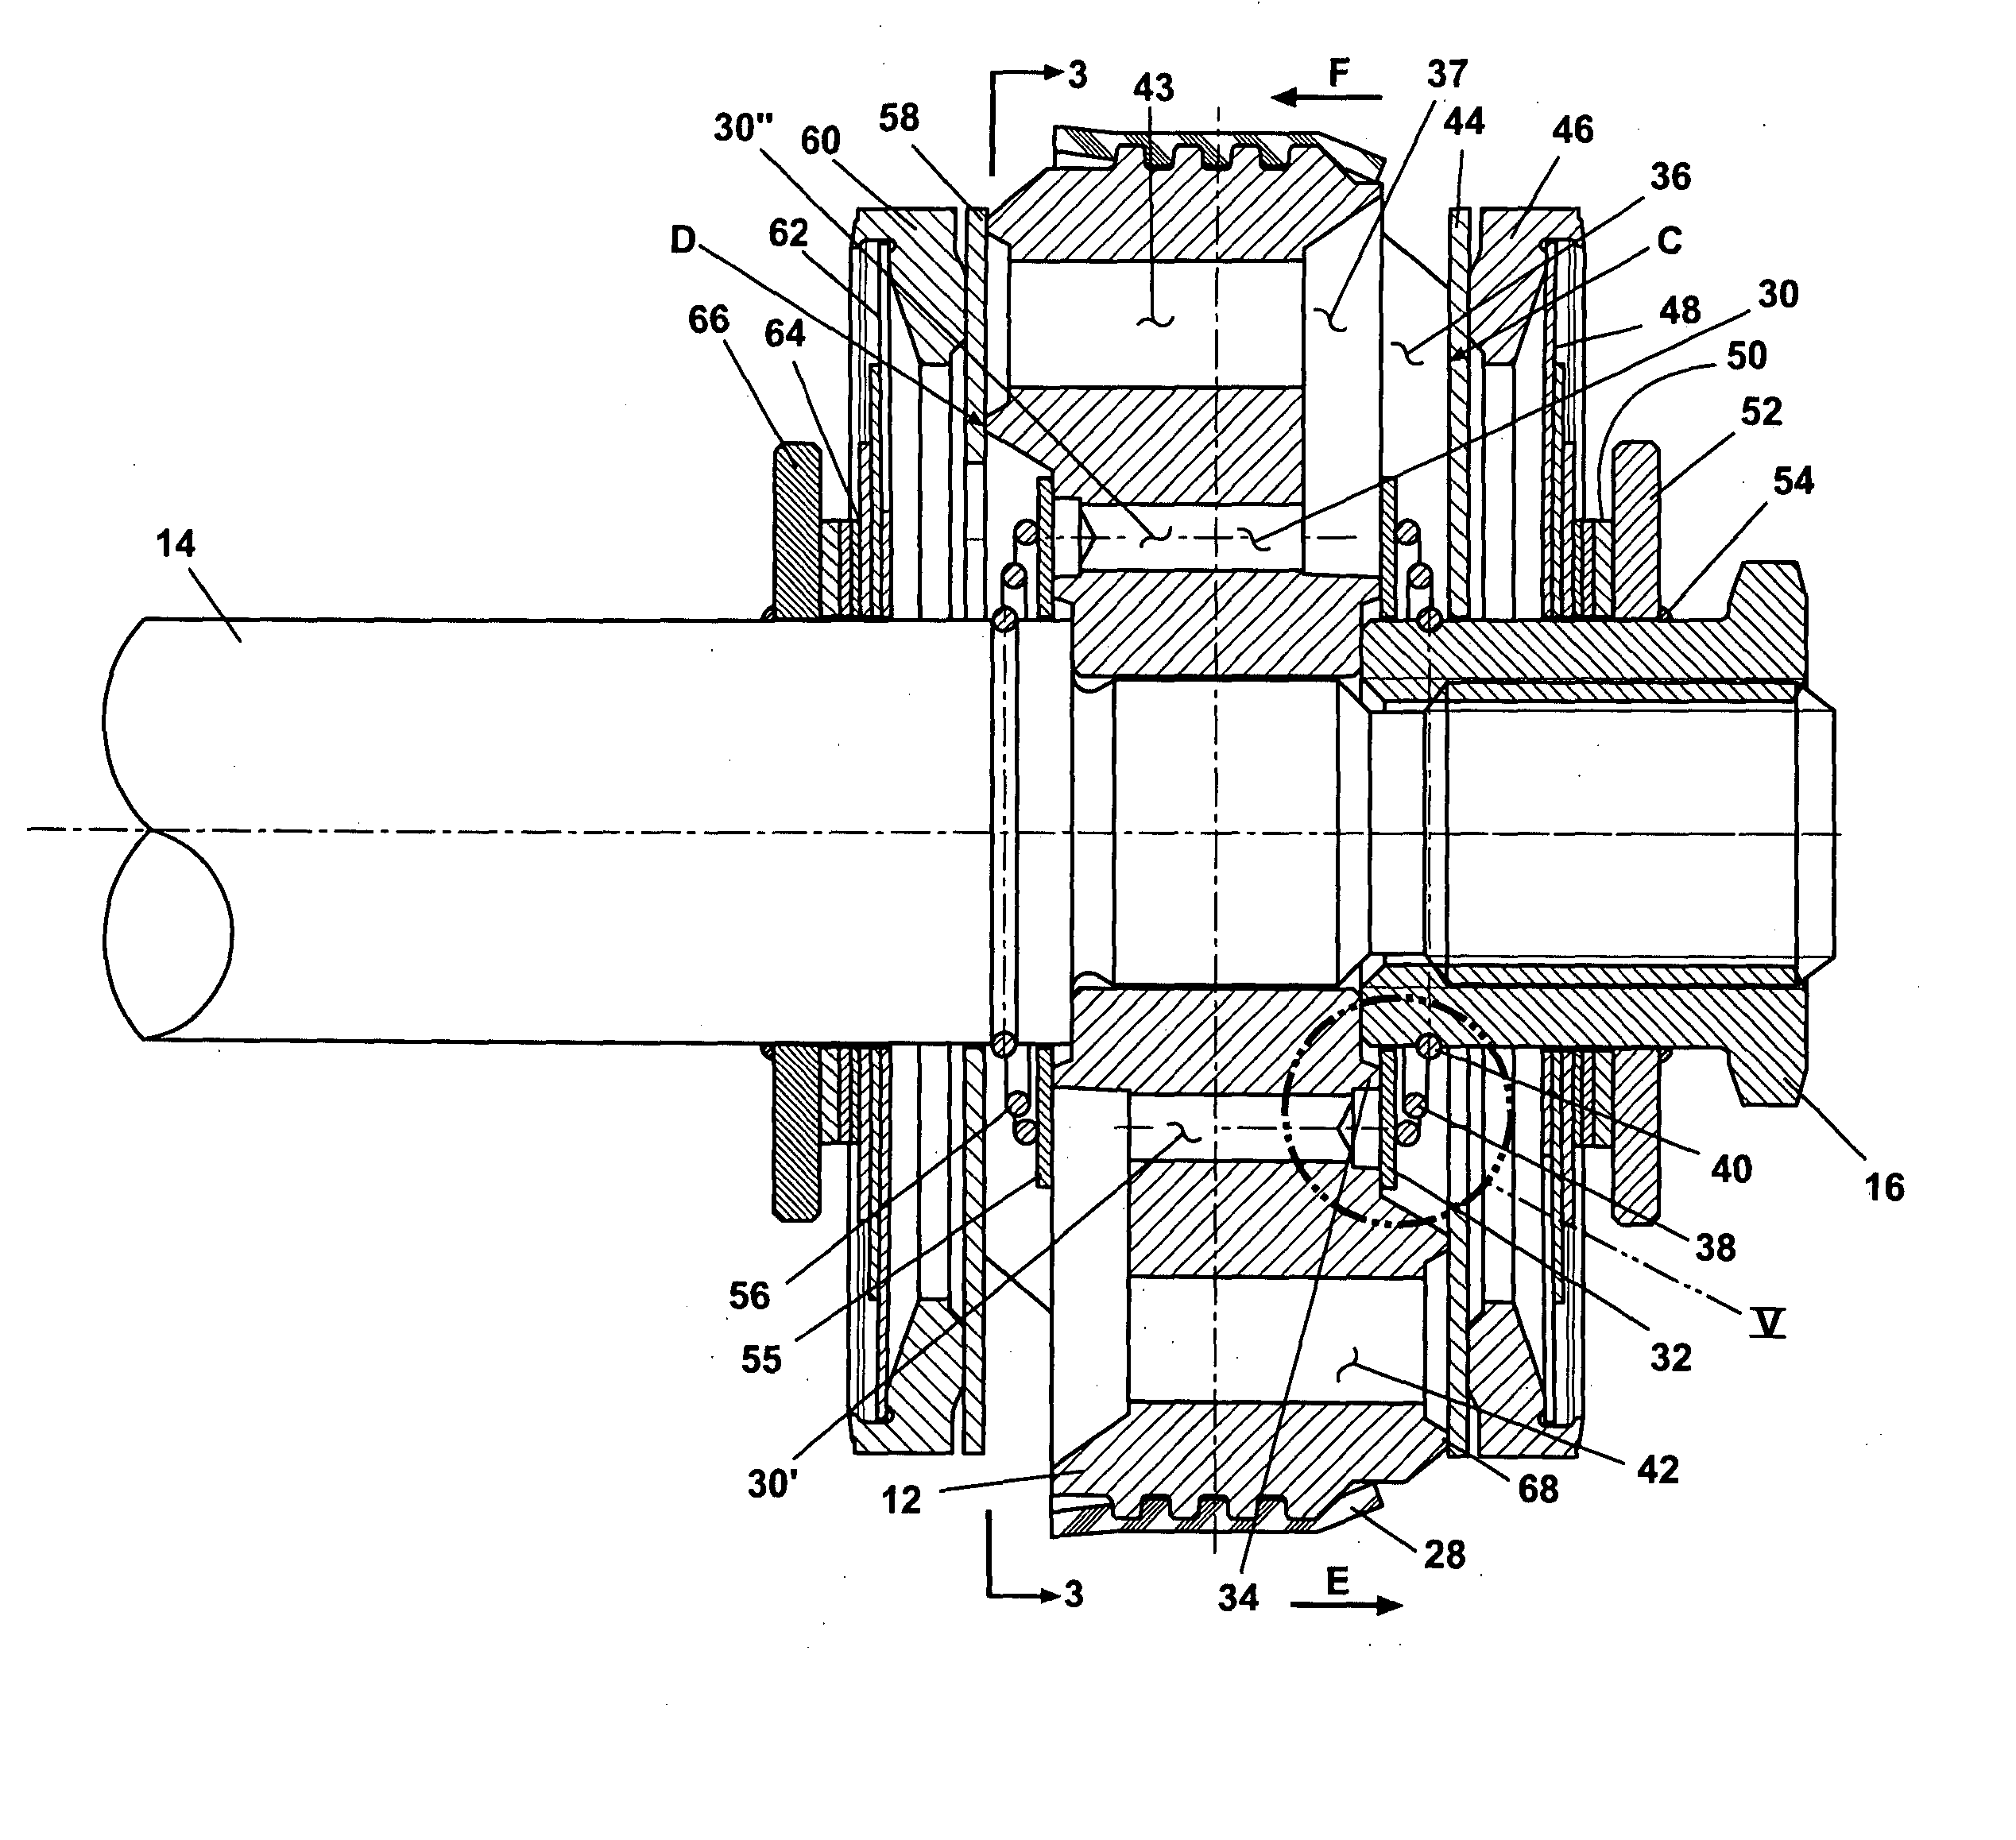 Monotube piston valving system with selective bleed